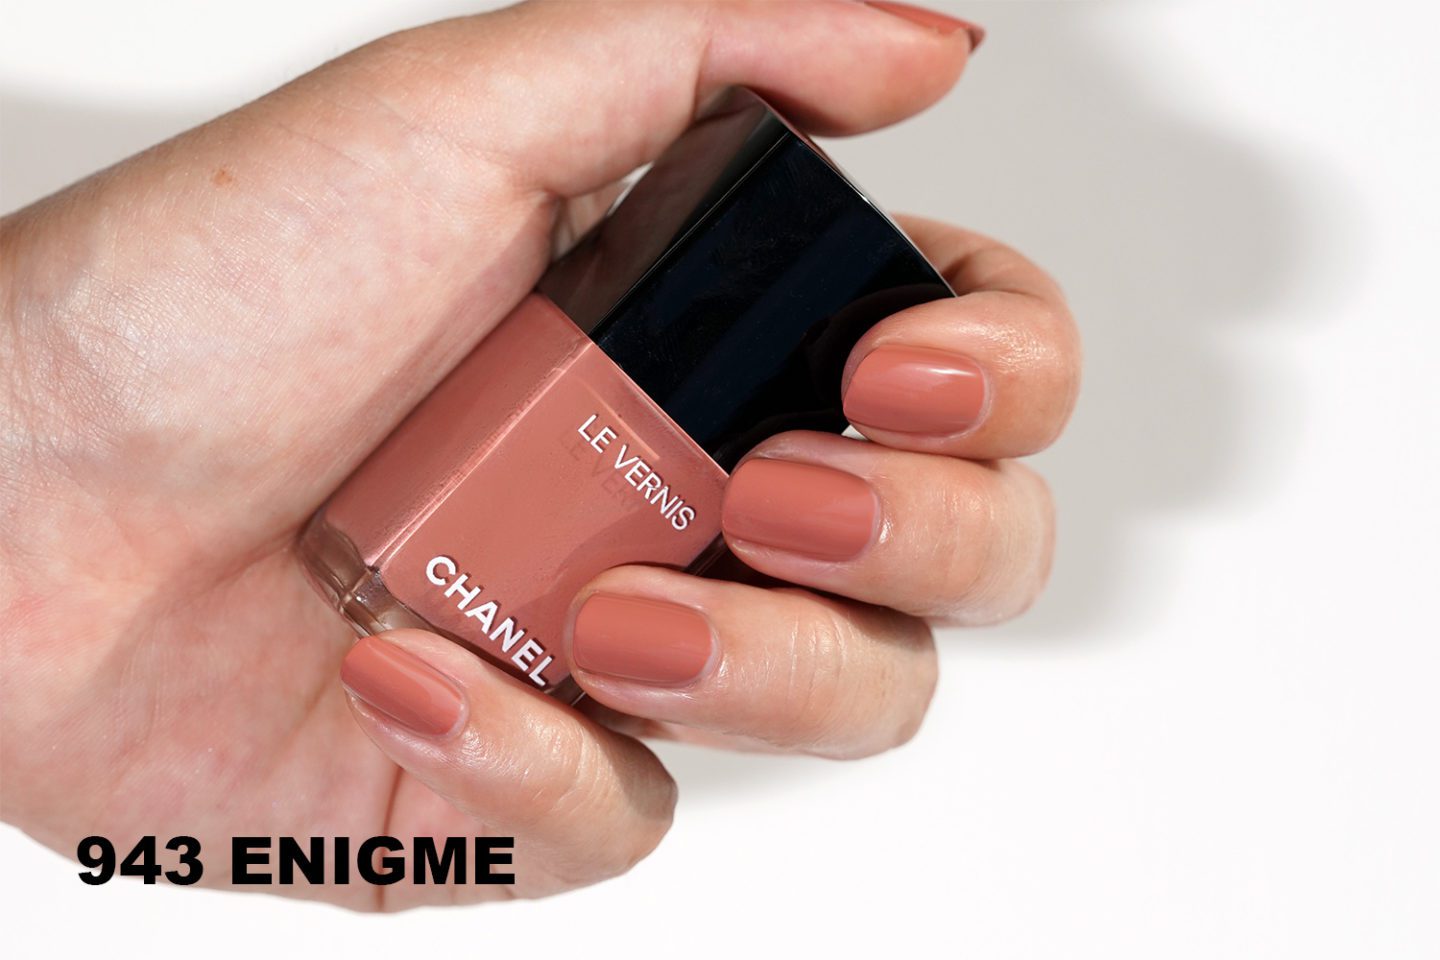 Chanel Le Vernis 943 Enigme swatch